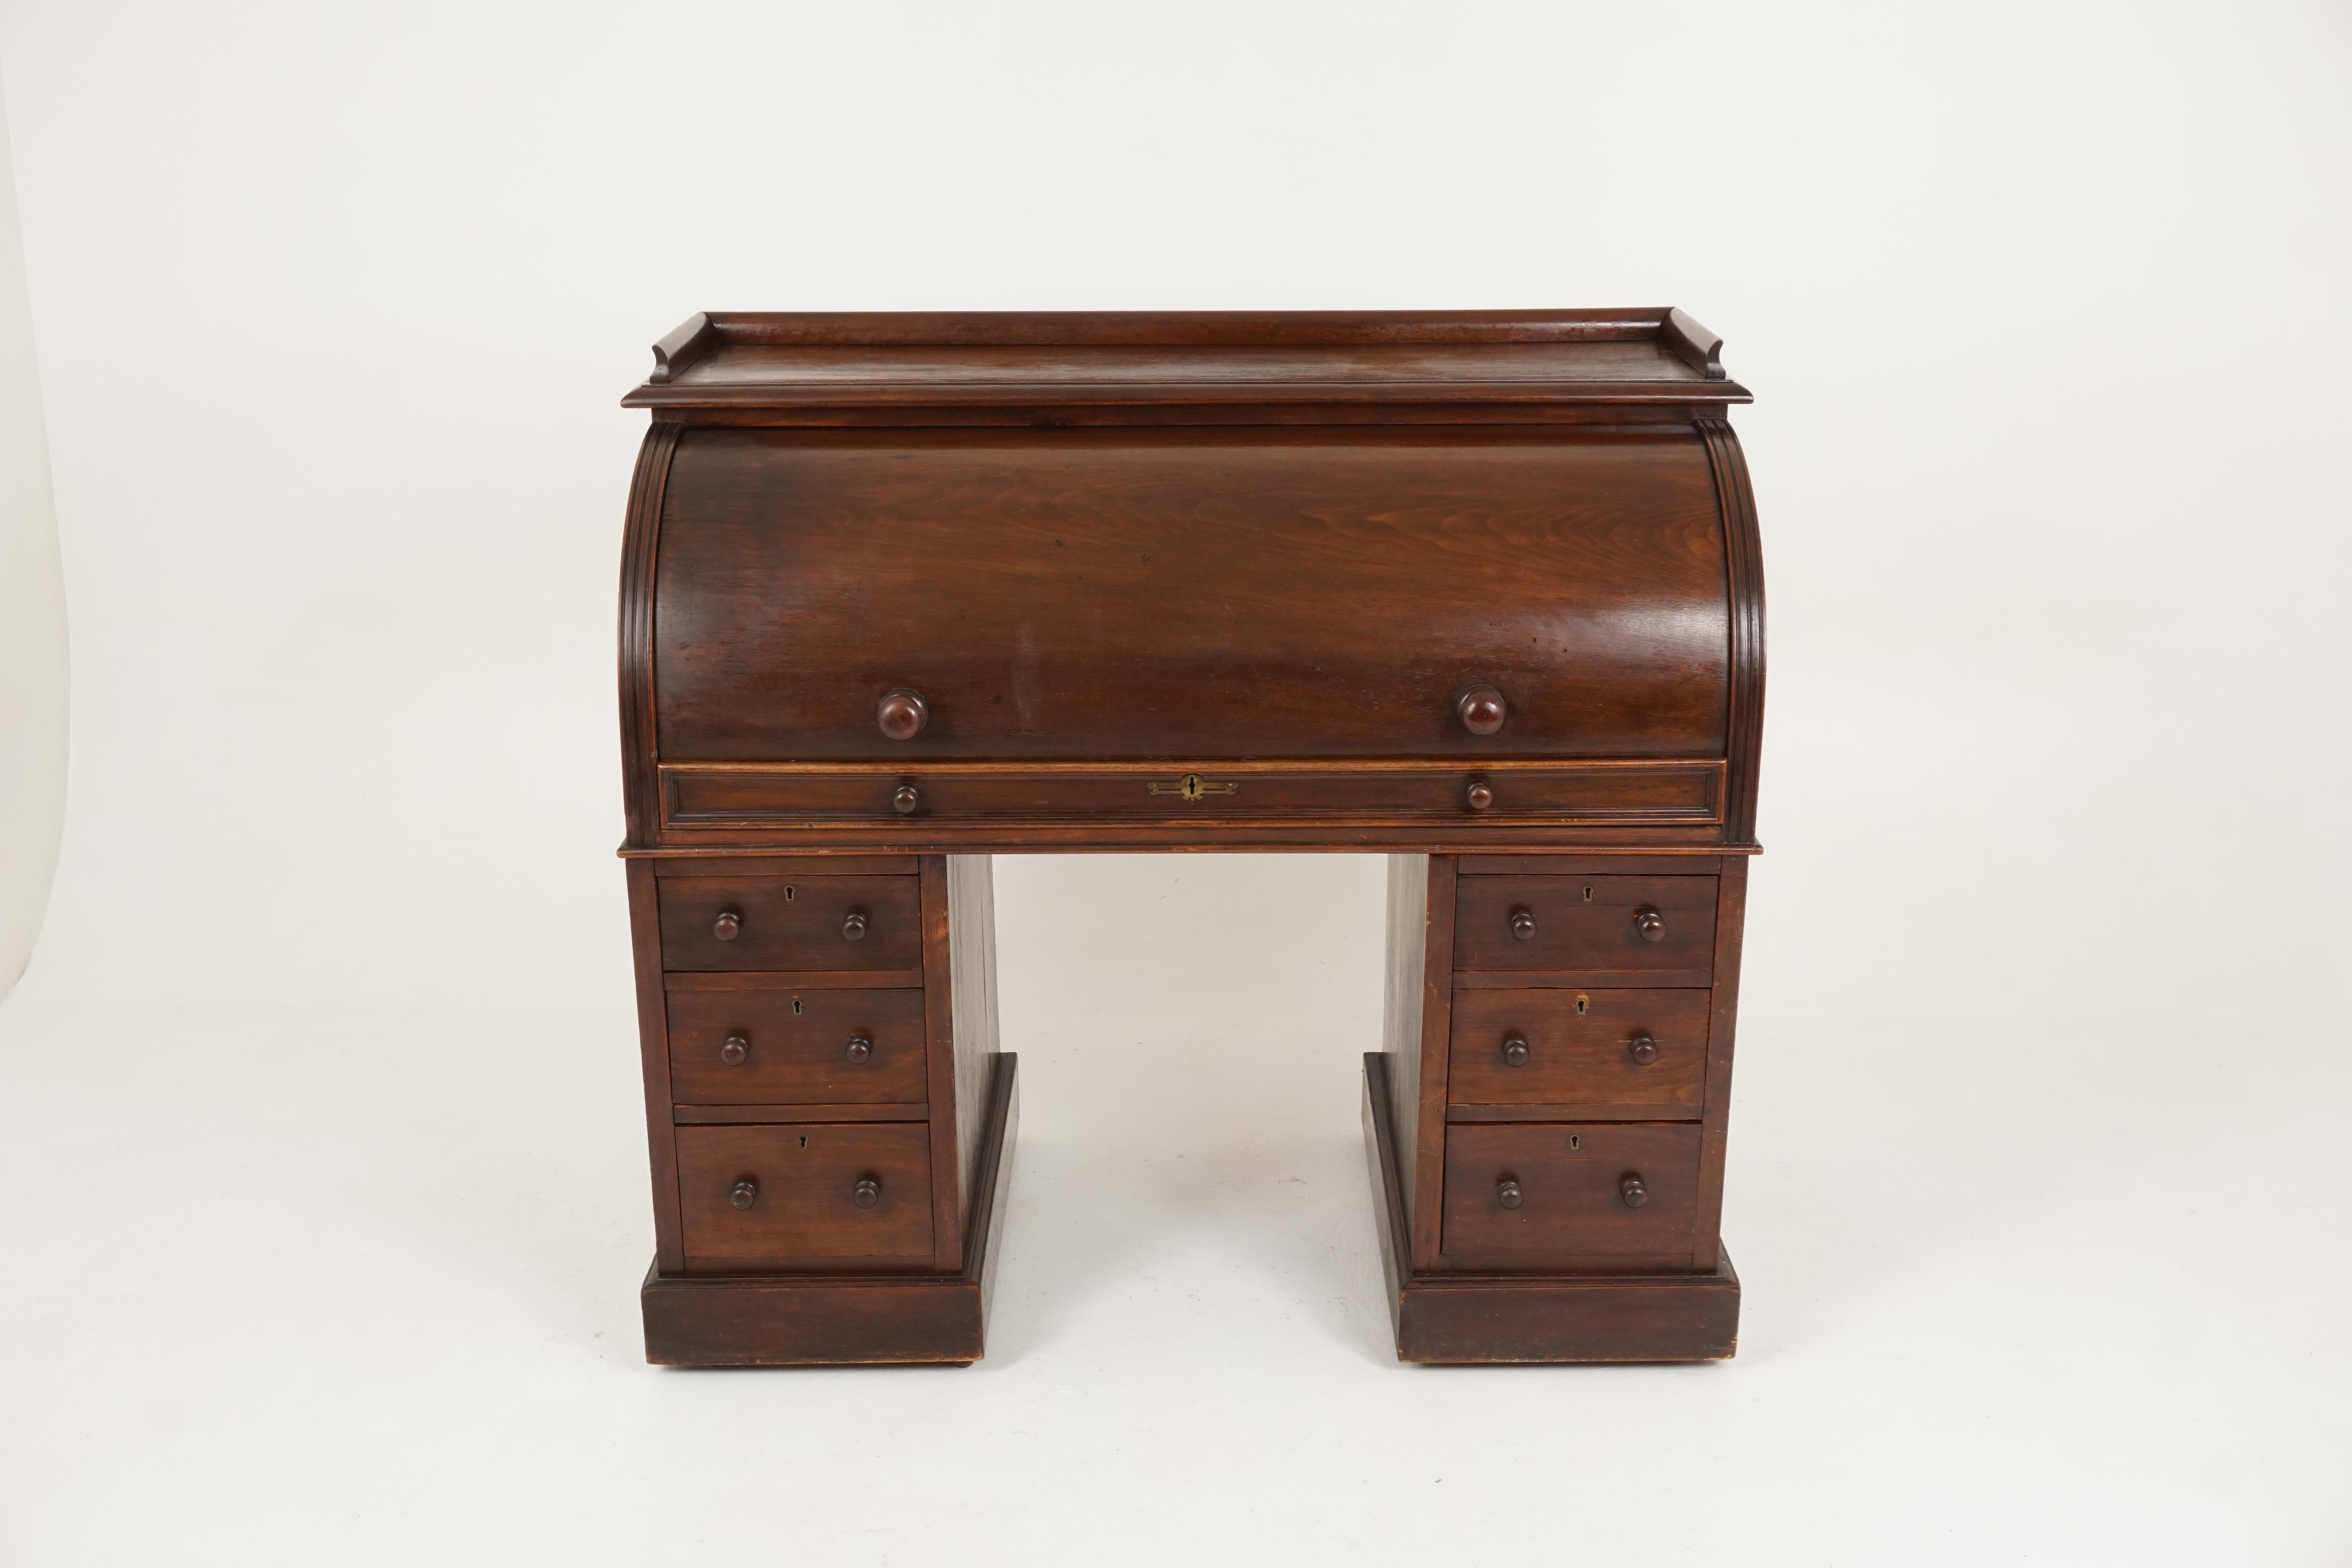 Antique Victorian mahogany desk, roll top desk, cylinder desk, Scotland 1880, B2183

Scotland, 1880
Solid mahogany and veneers
Original finish
Three quarter gallery with moulded edge
Above a cylinder top opening a configuration of pigeon hole